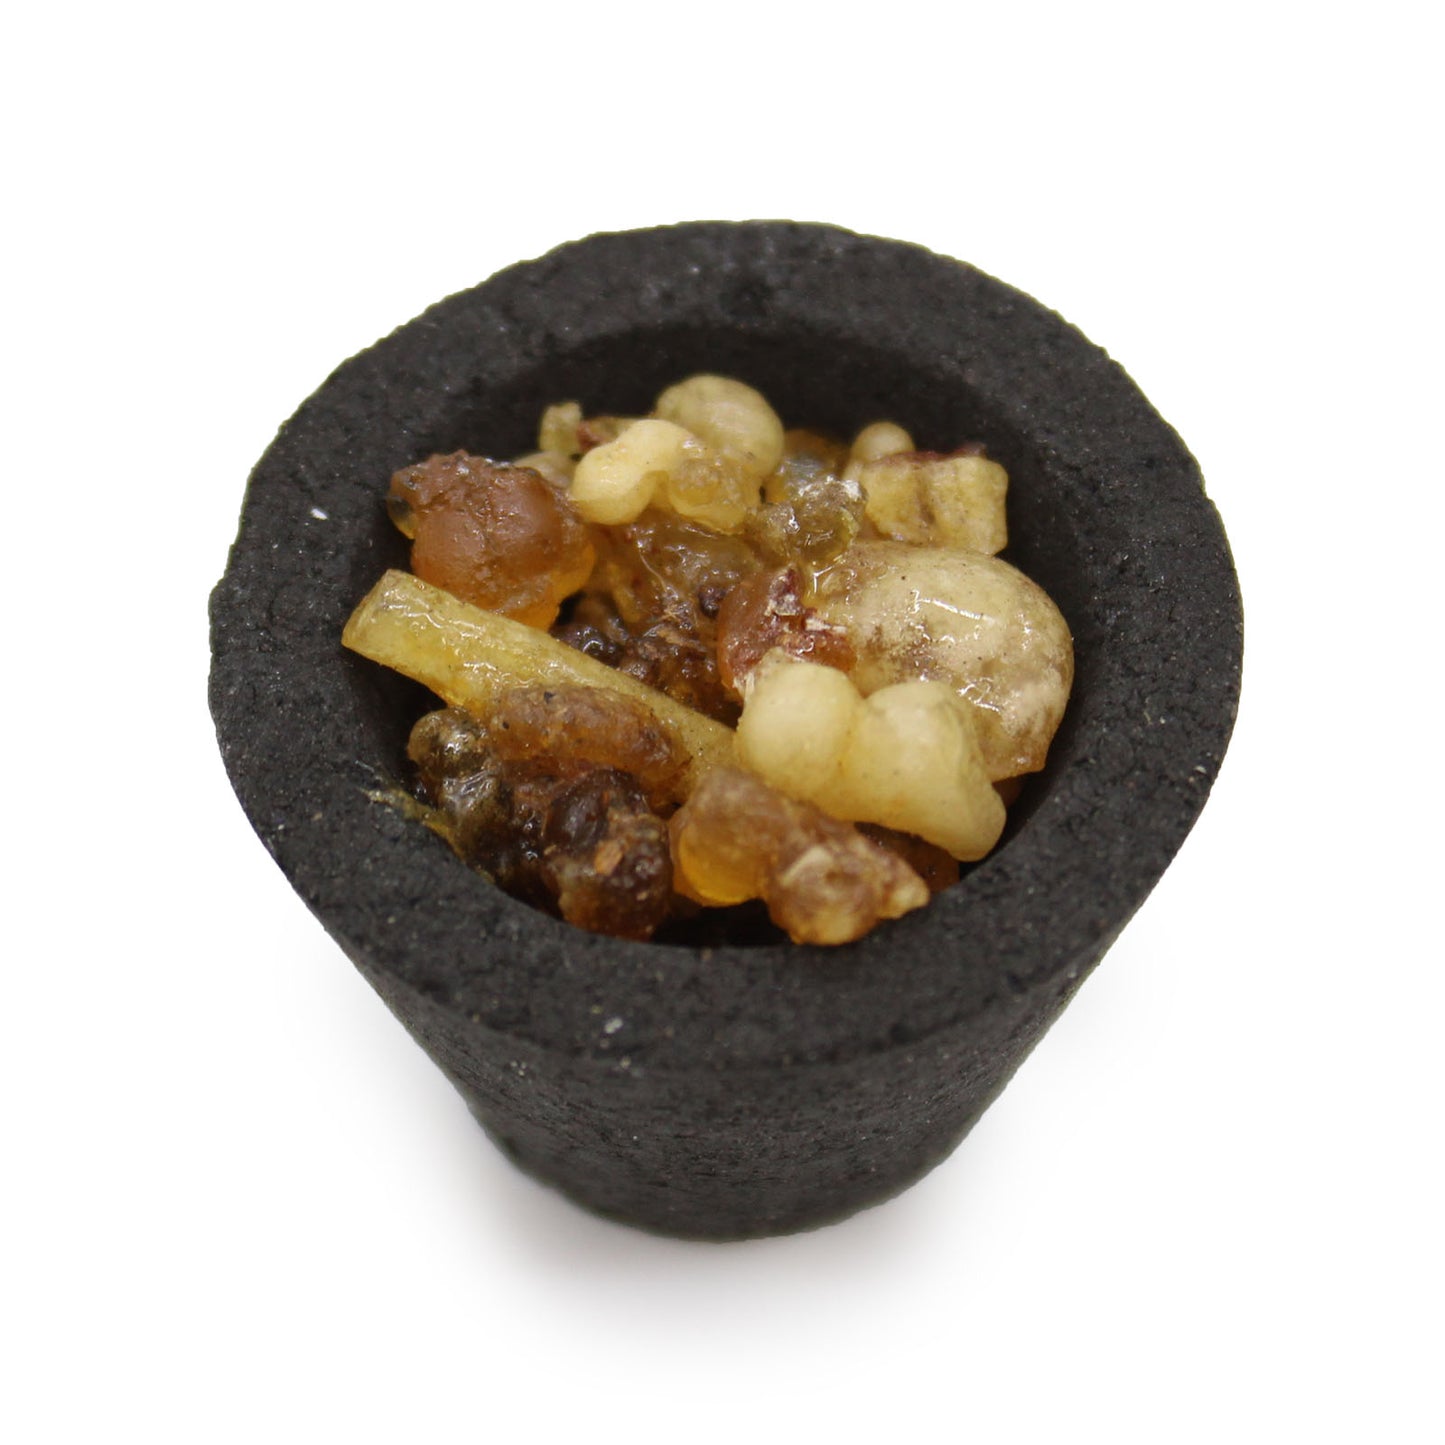 Frankincense Resin Cups (Pack of 12)